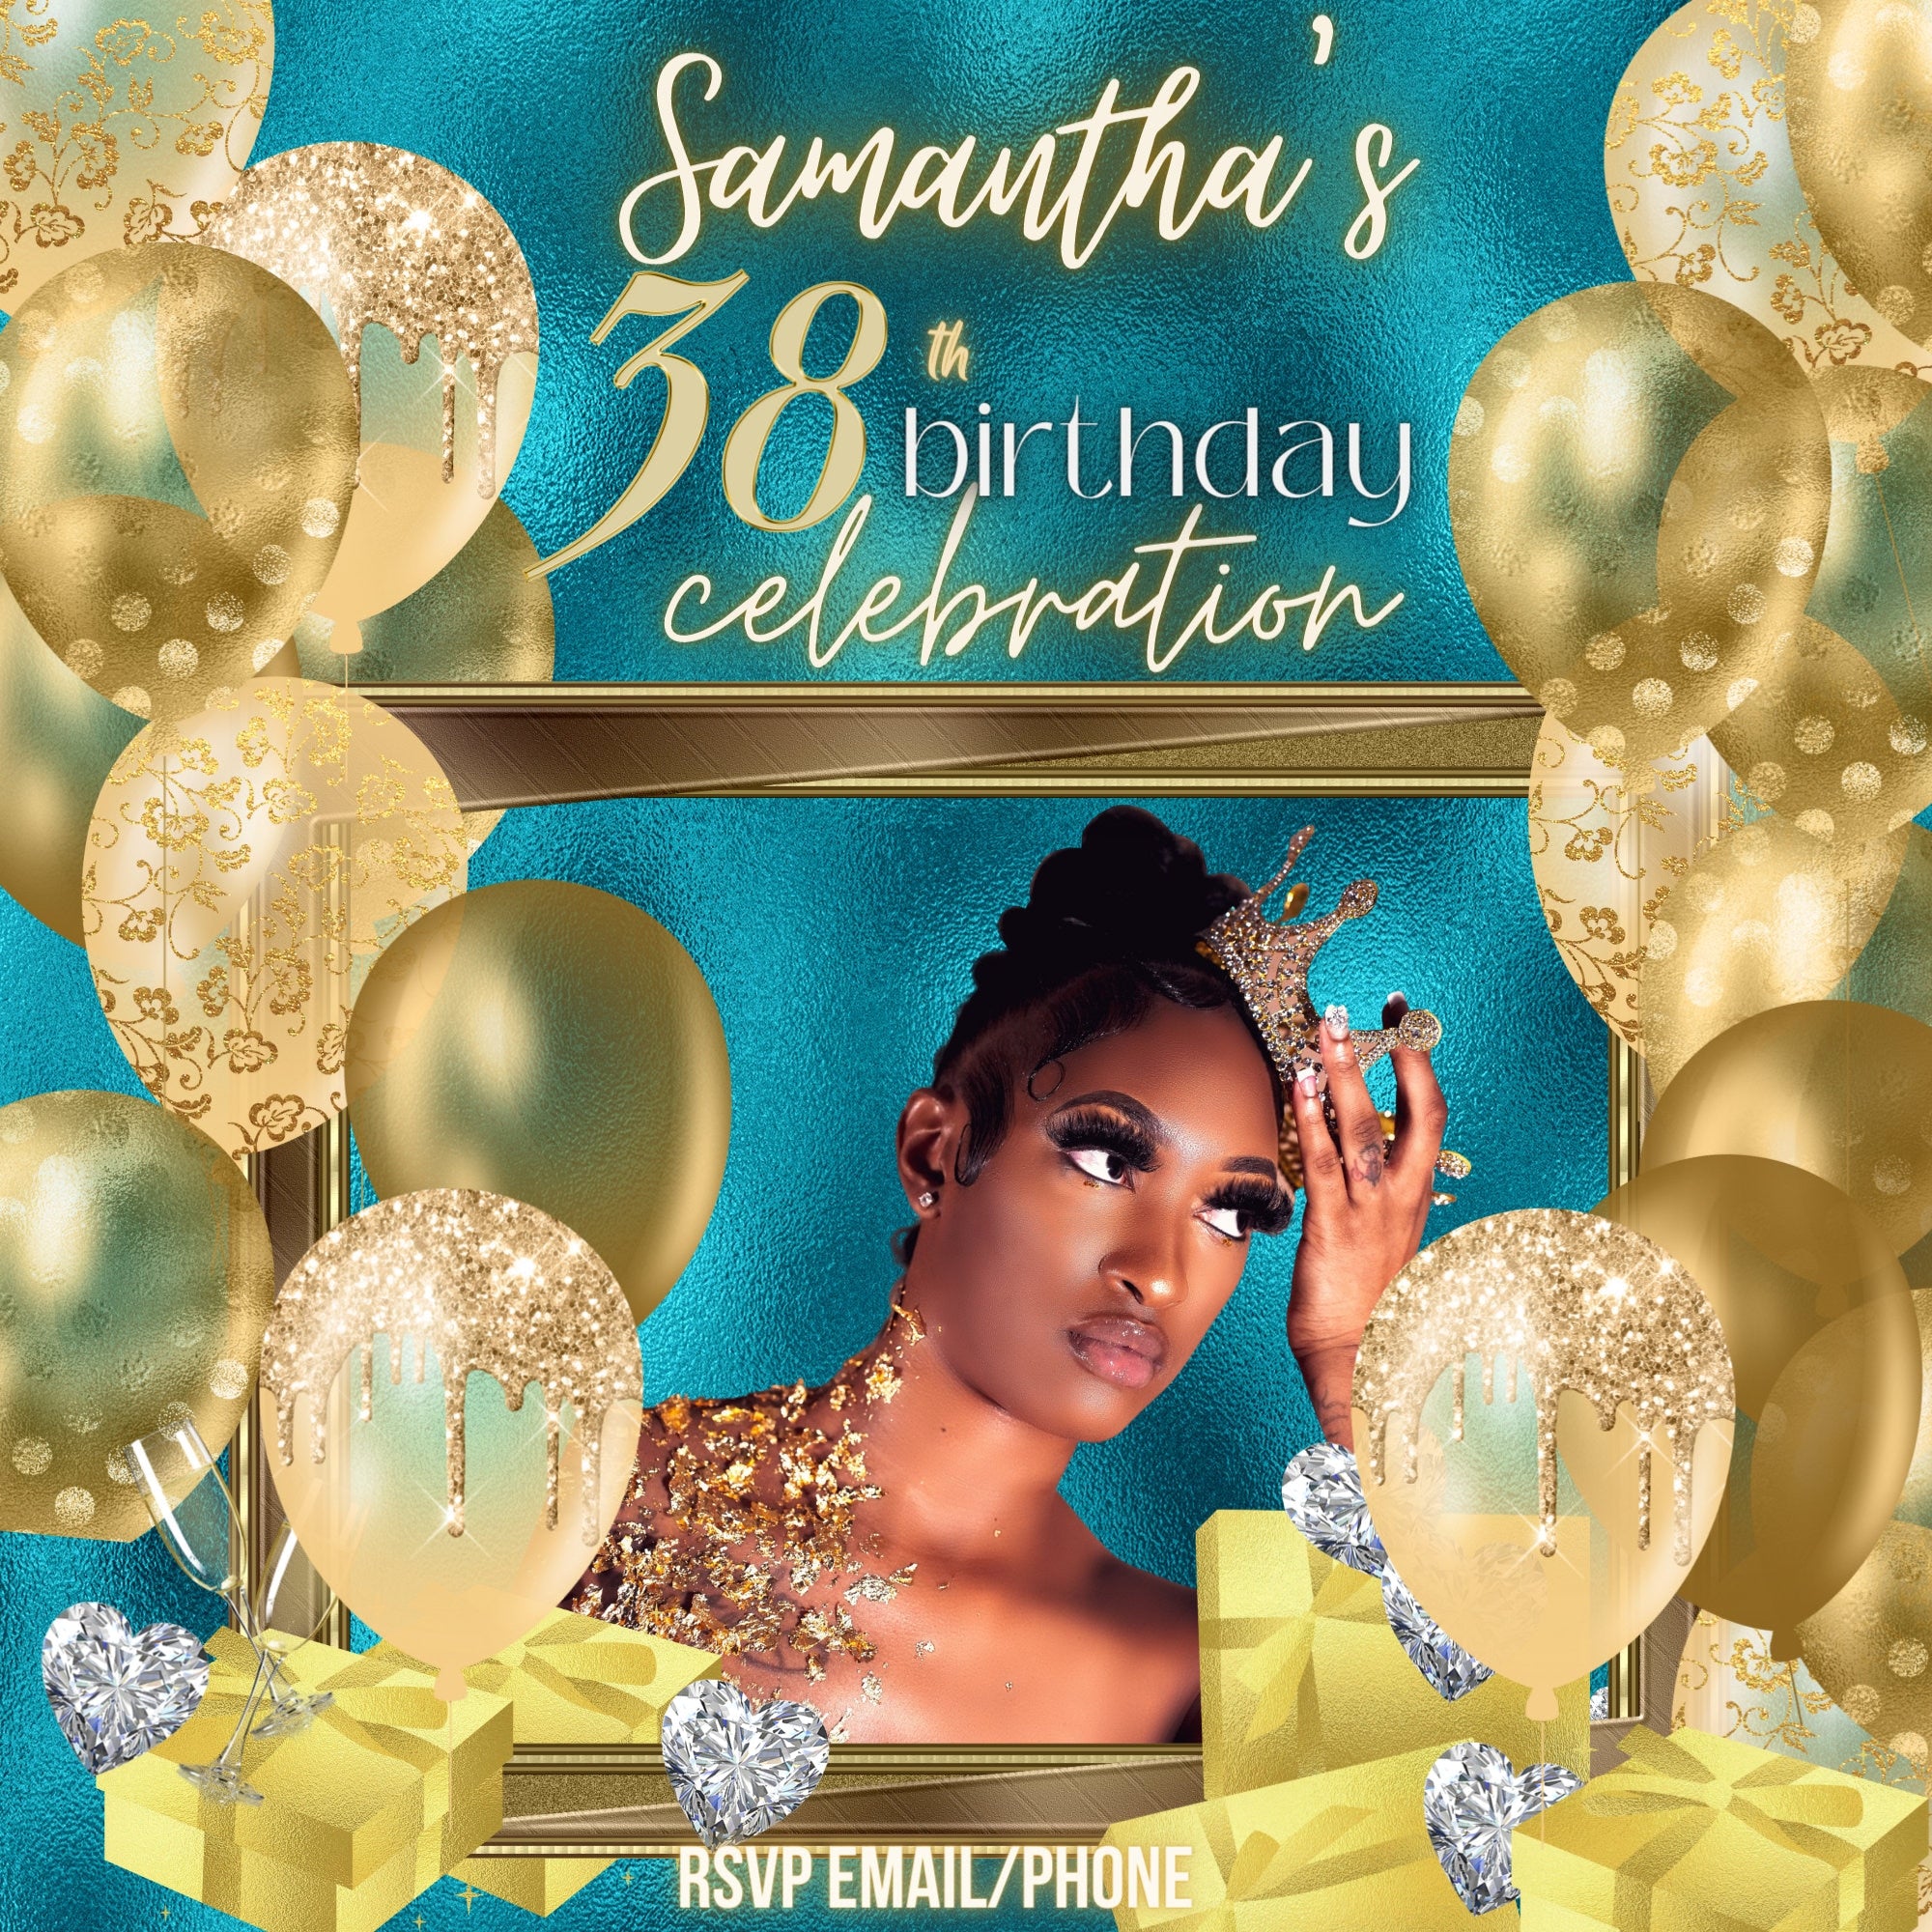 Birthday Flyer, 38th Birthday Celebration template, Gold and Teal  -  numbers 0-9 added, Editable Flyer,  Birthday